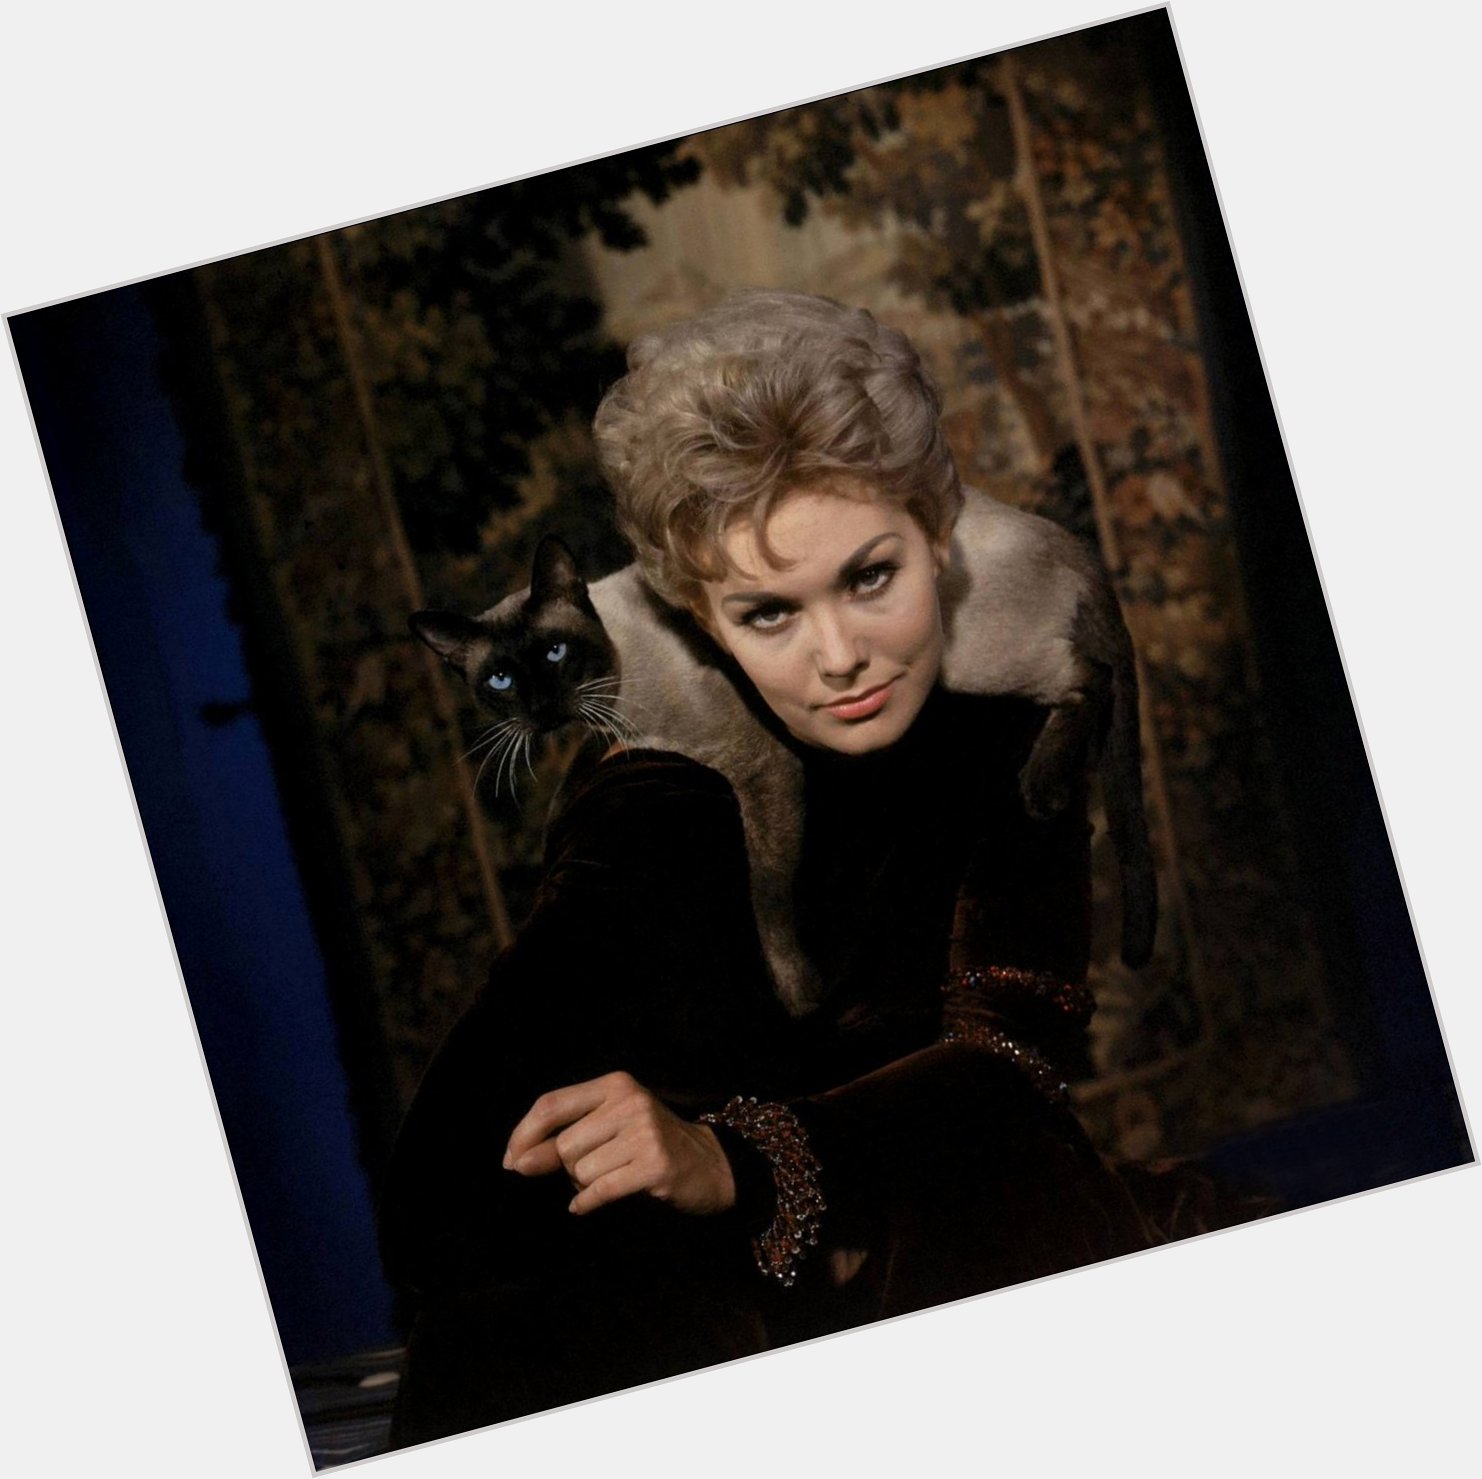 Happy Birthday to Kim Novak, star of one of my favorite comedies, BELL, BOOK AND CANDLE. 